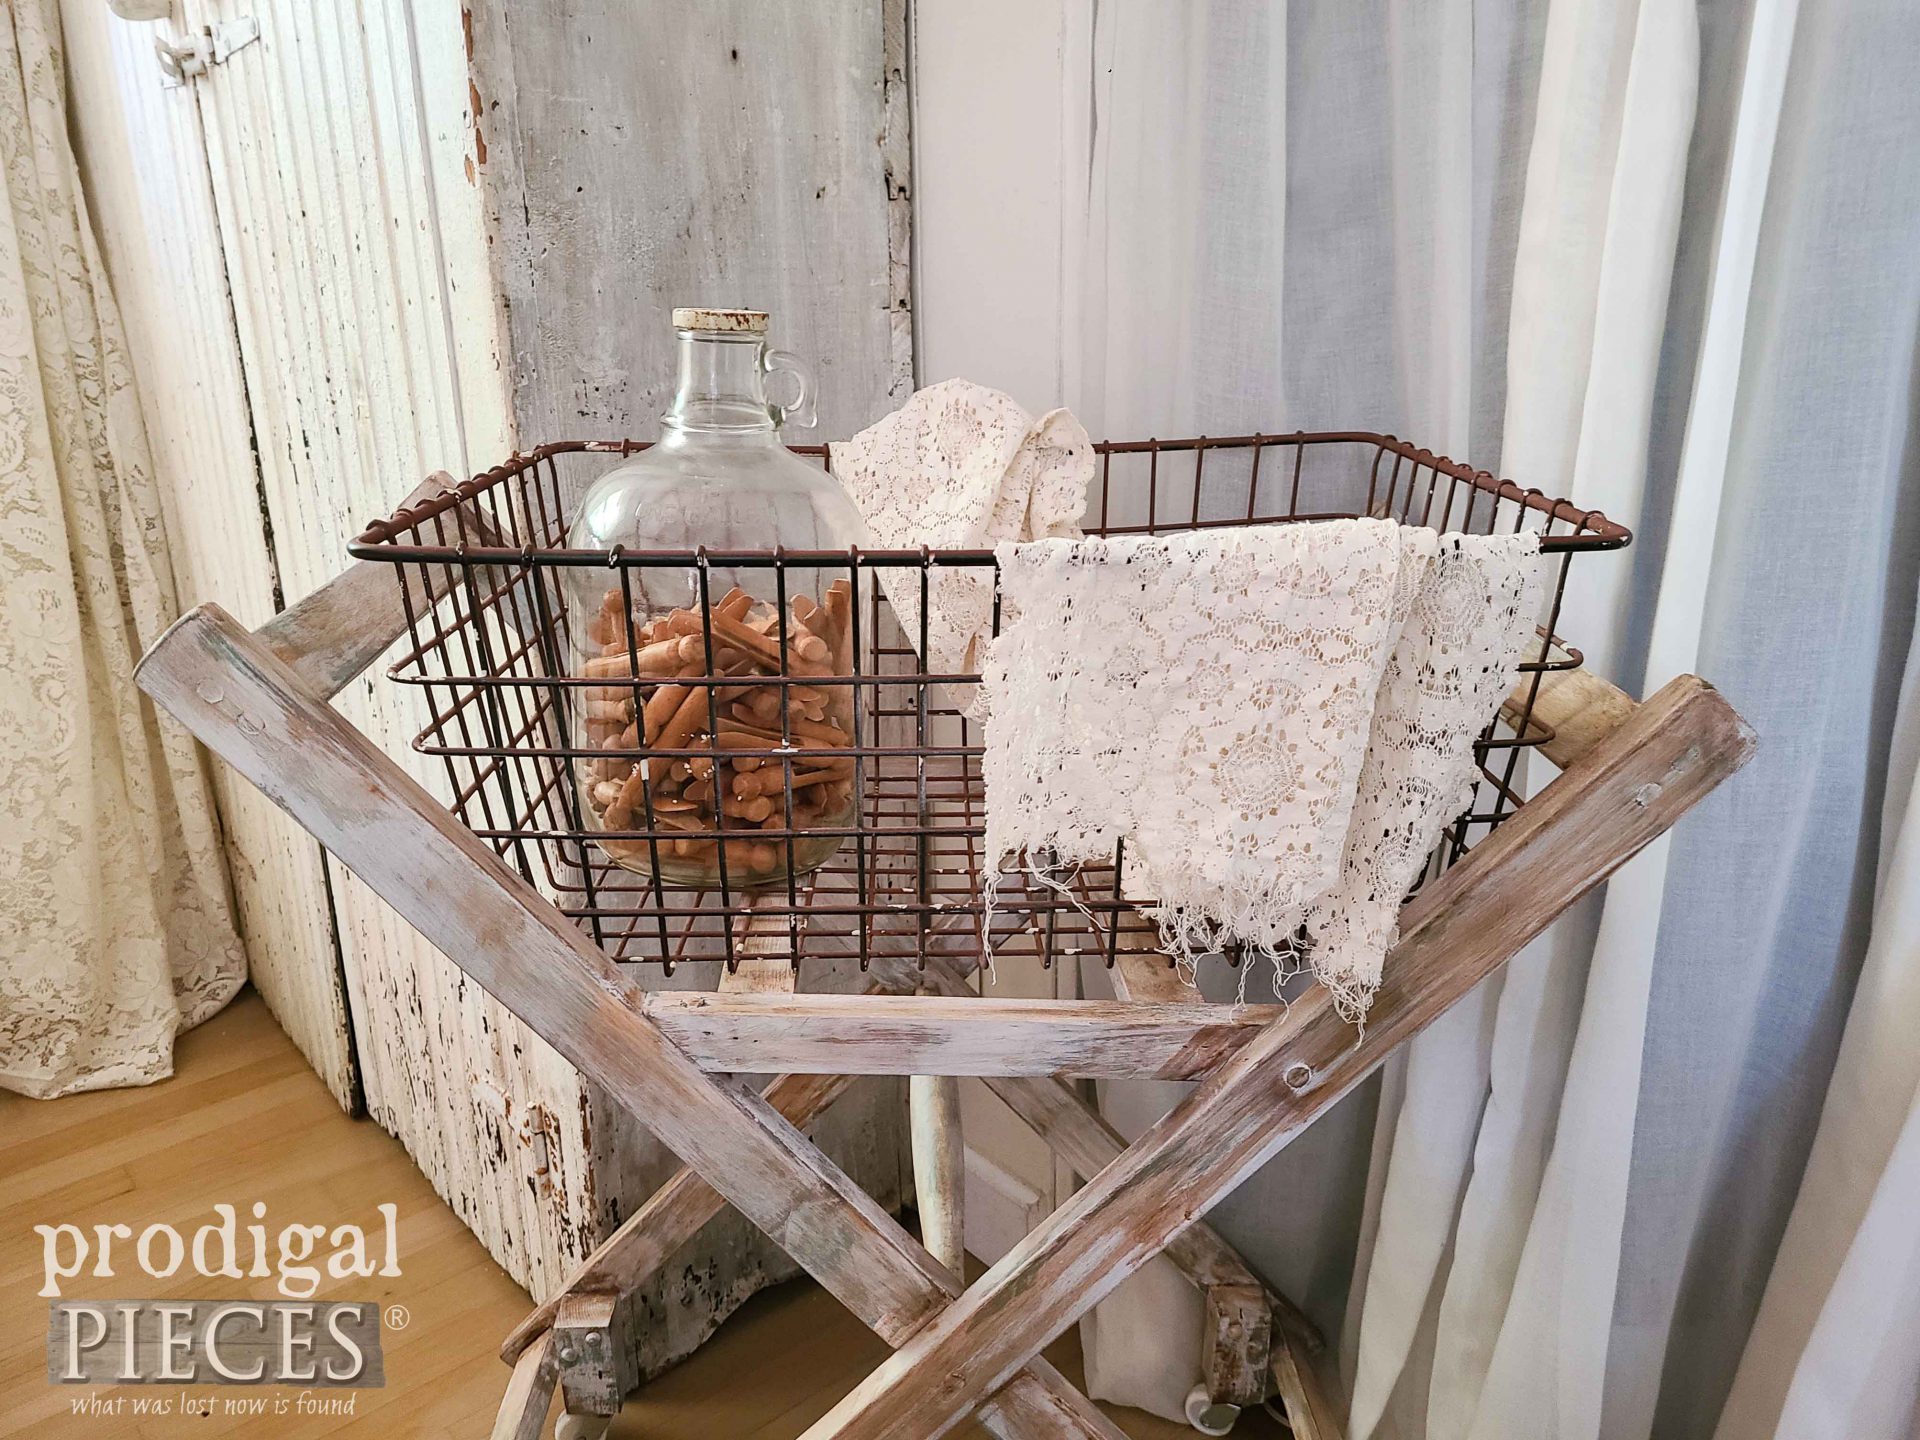 Wire Antique Laundry Basket Cart by Larissa of Prodigal Pieces | prodigalpieces.com #prodigalpieces #farmhouse #hadnmade